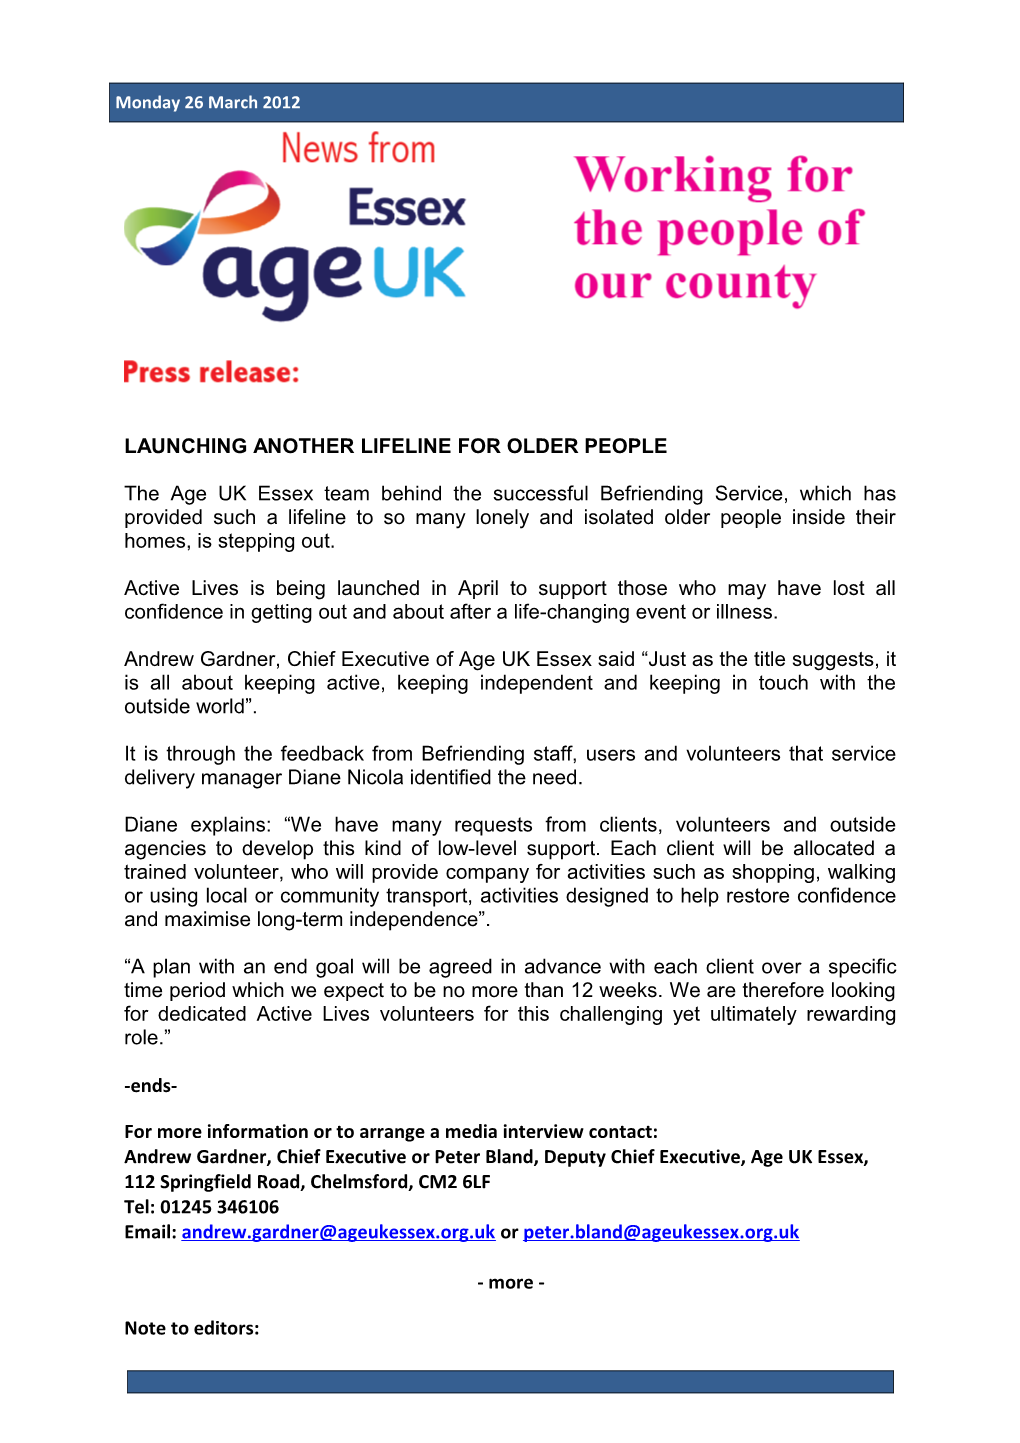 Launching Another Lifeline for Older People